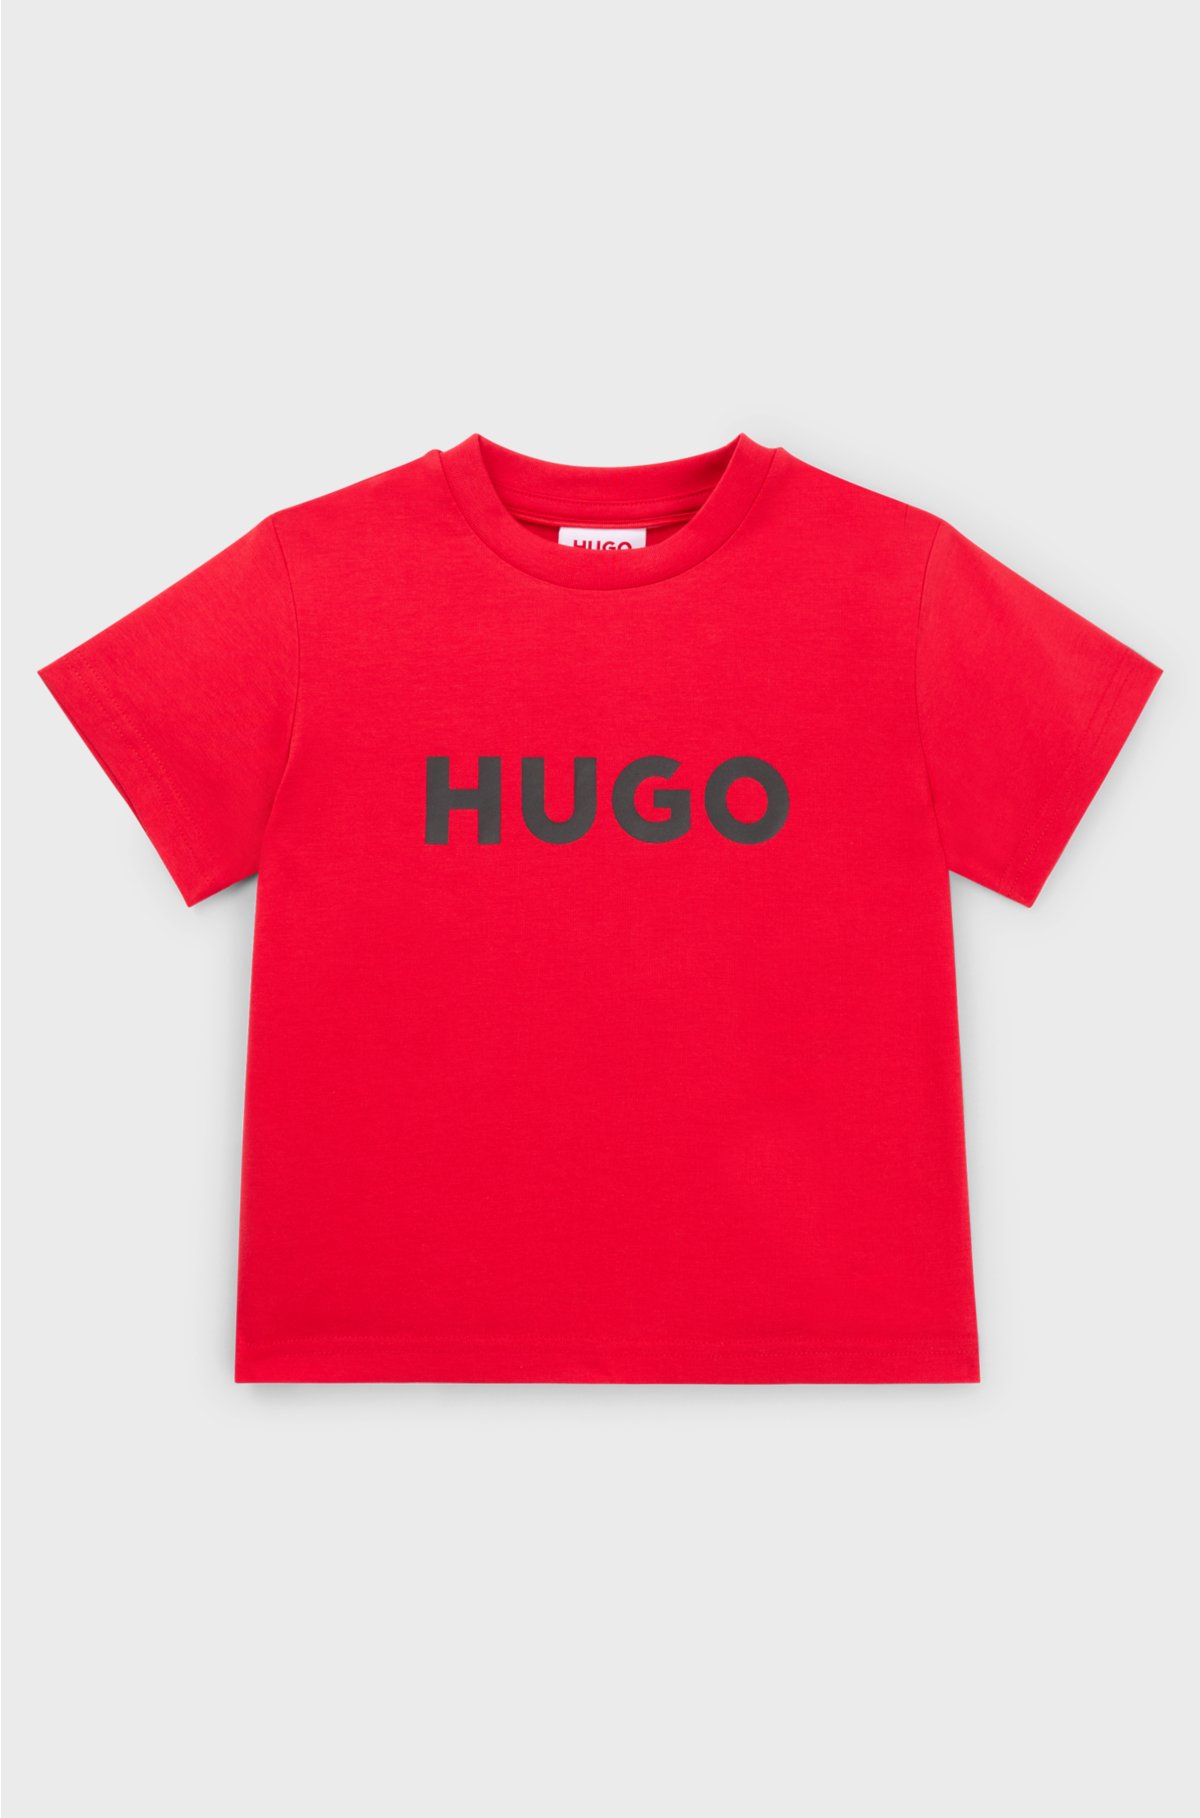 Kids' T-shirt in cotton jersey with logo print, Red